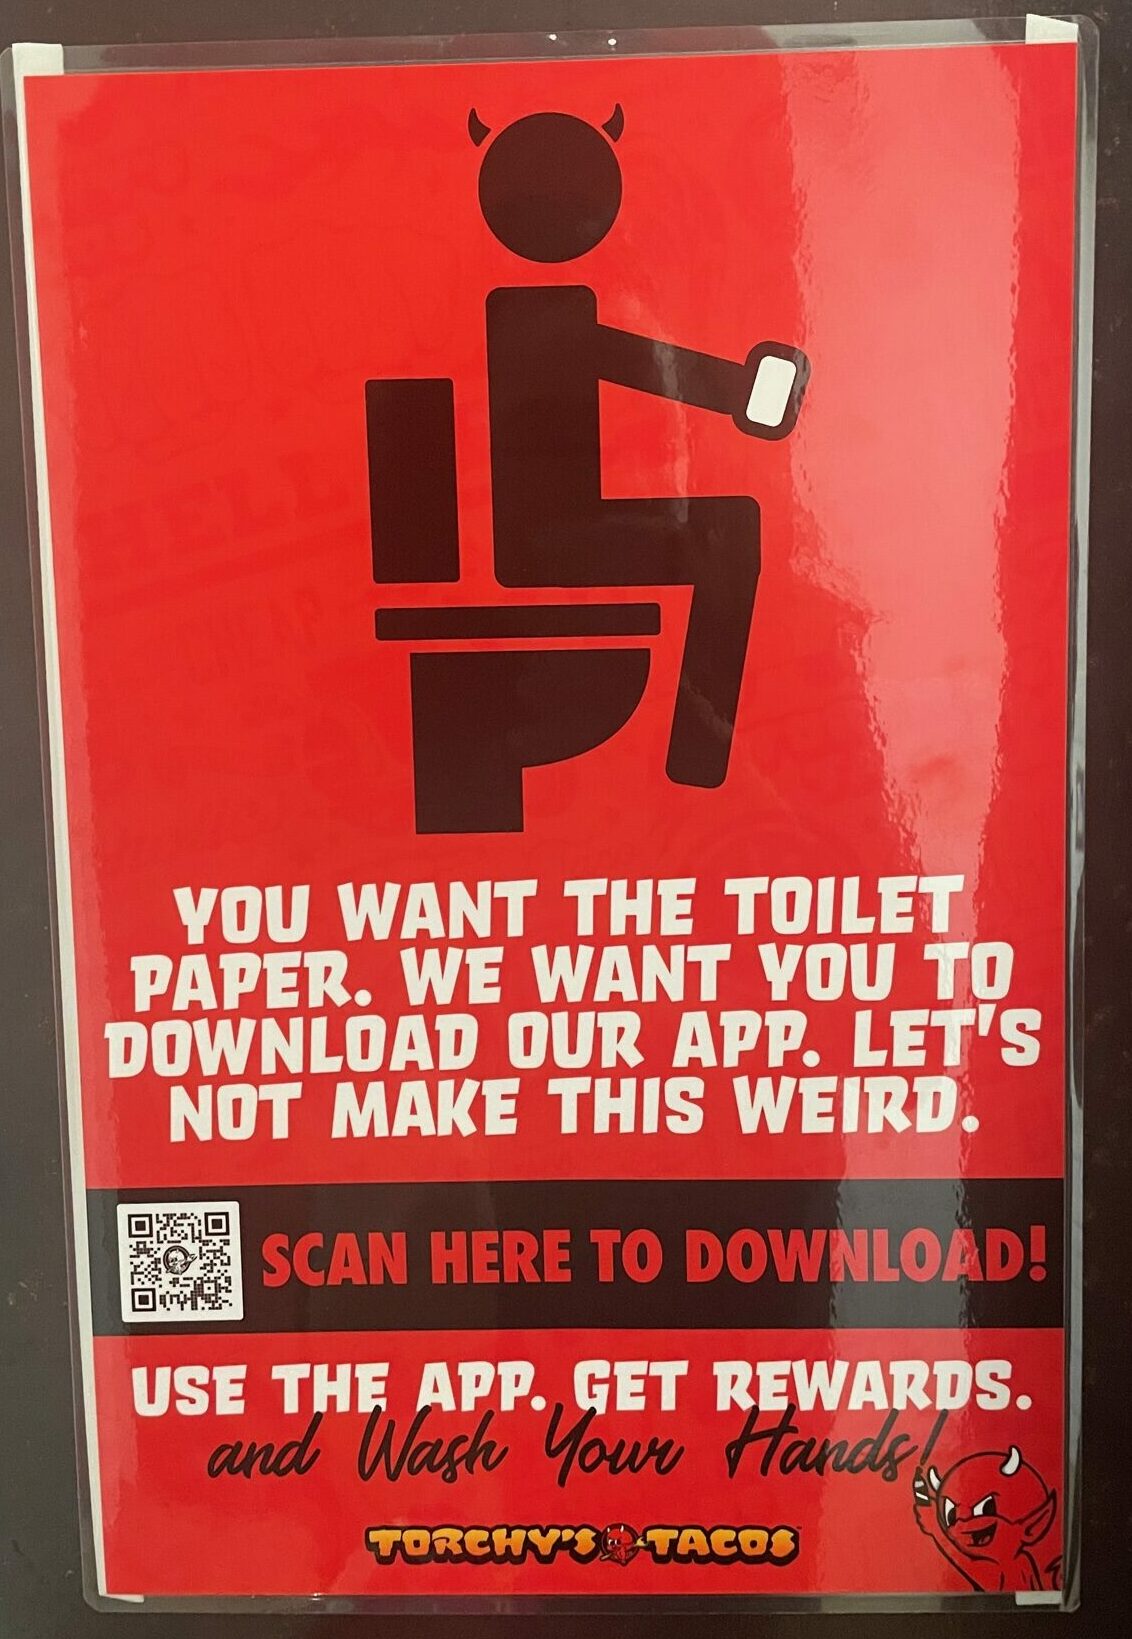 A restaurant asks patrons to choose between toilet paper and downloading their app